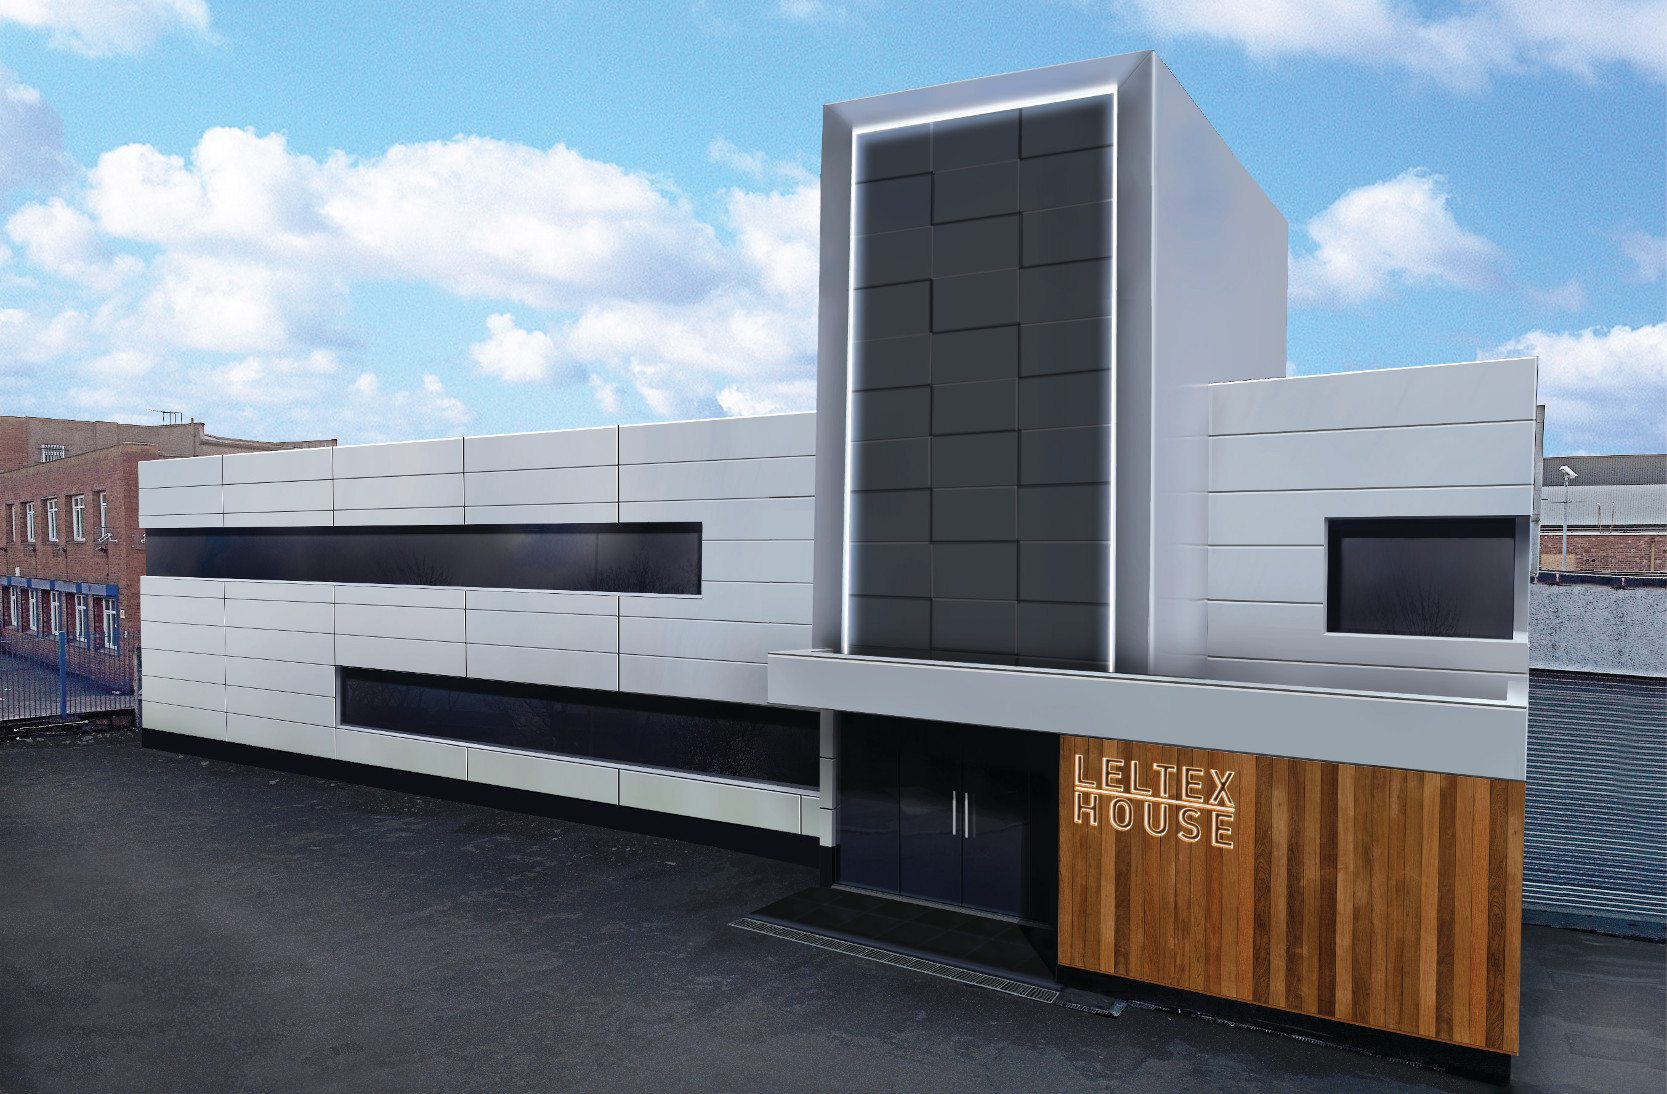 An artist's impression of the completed rain screen cladding project.